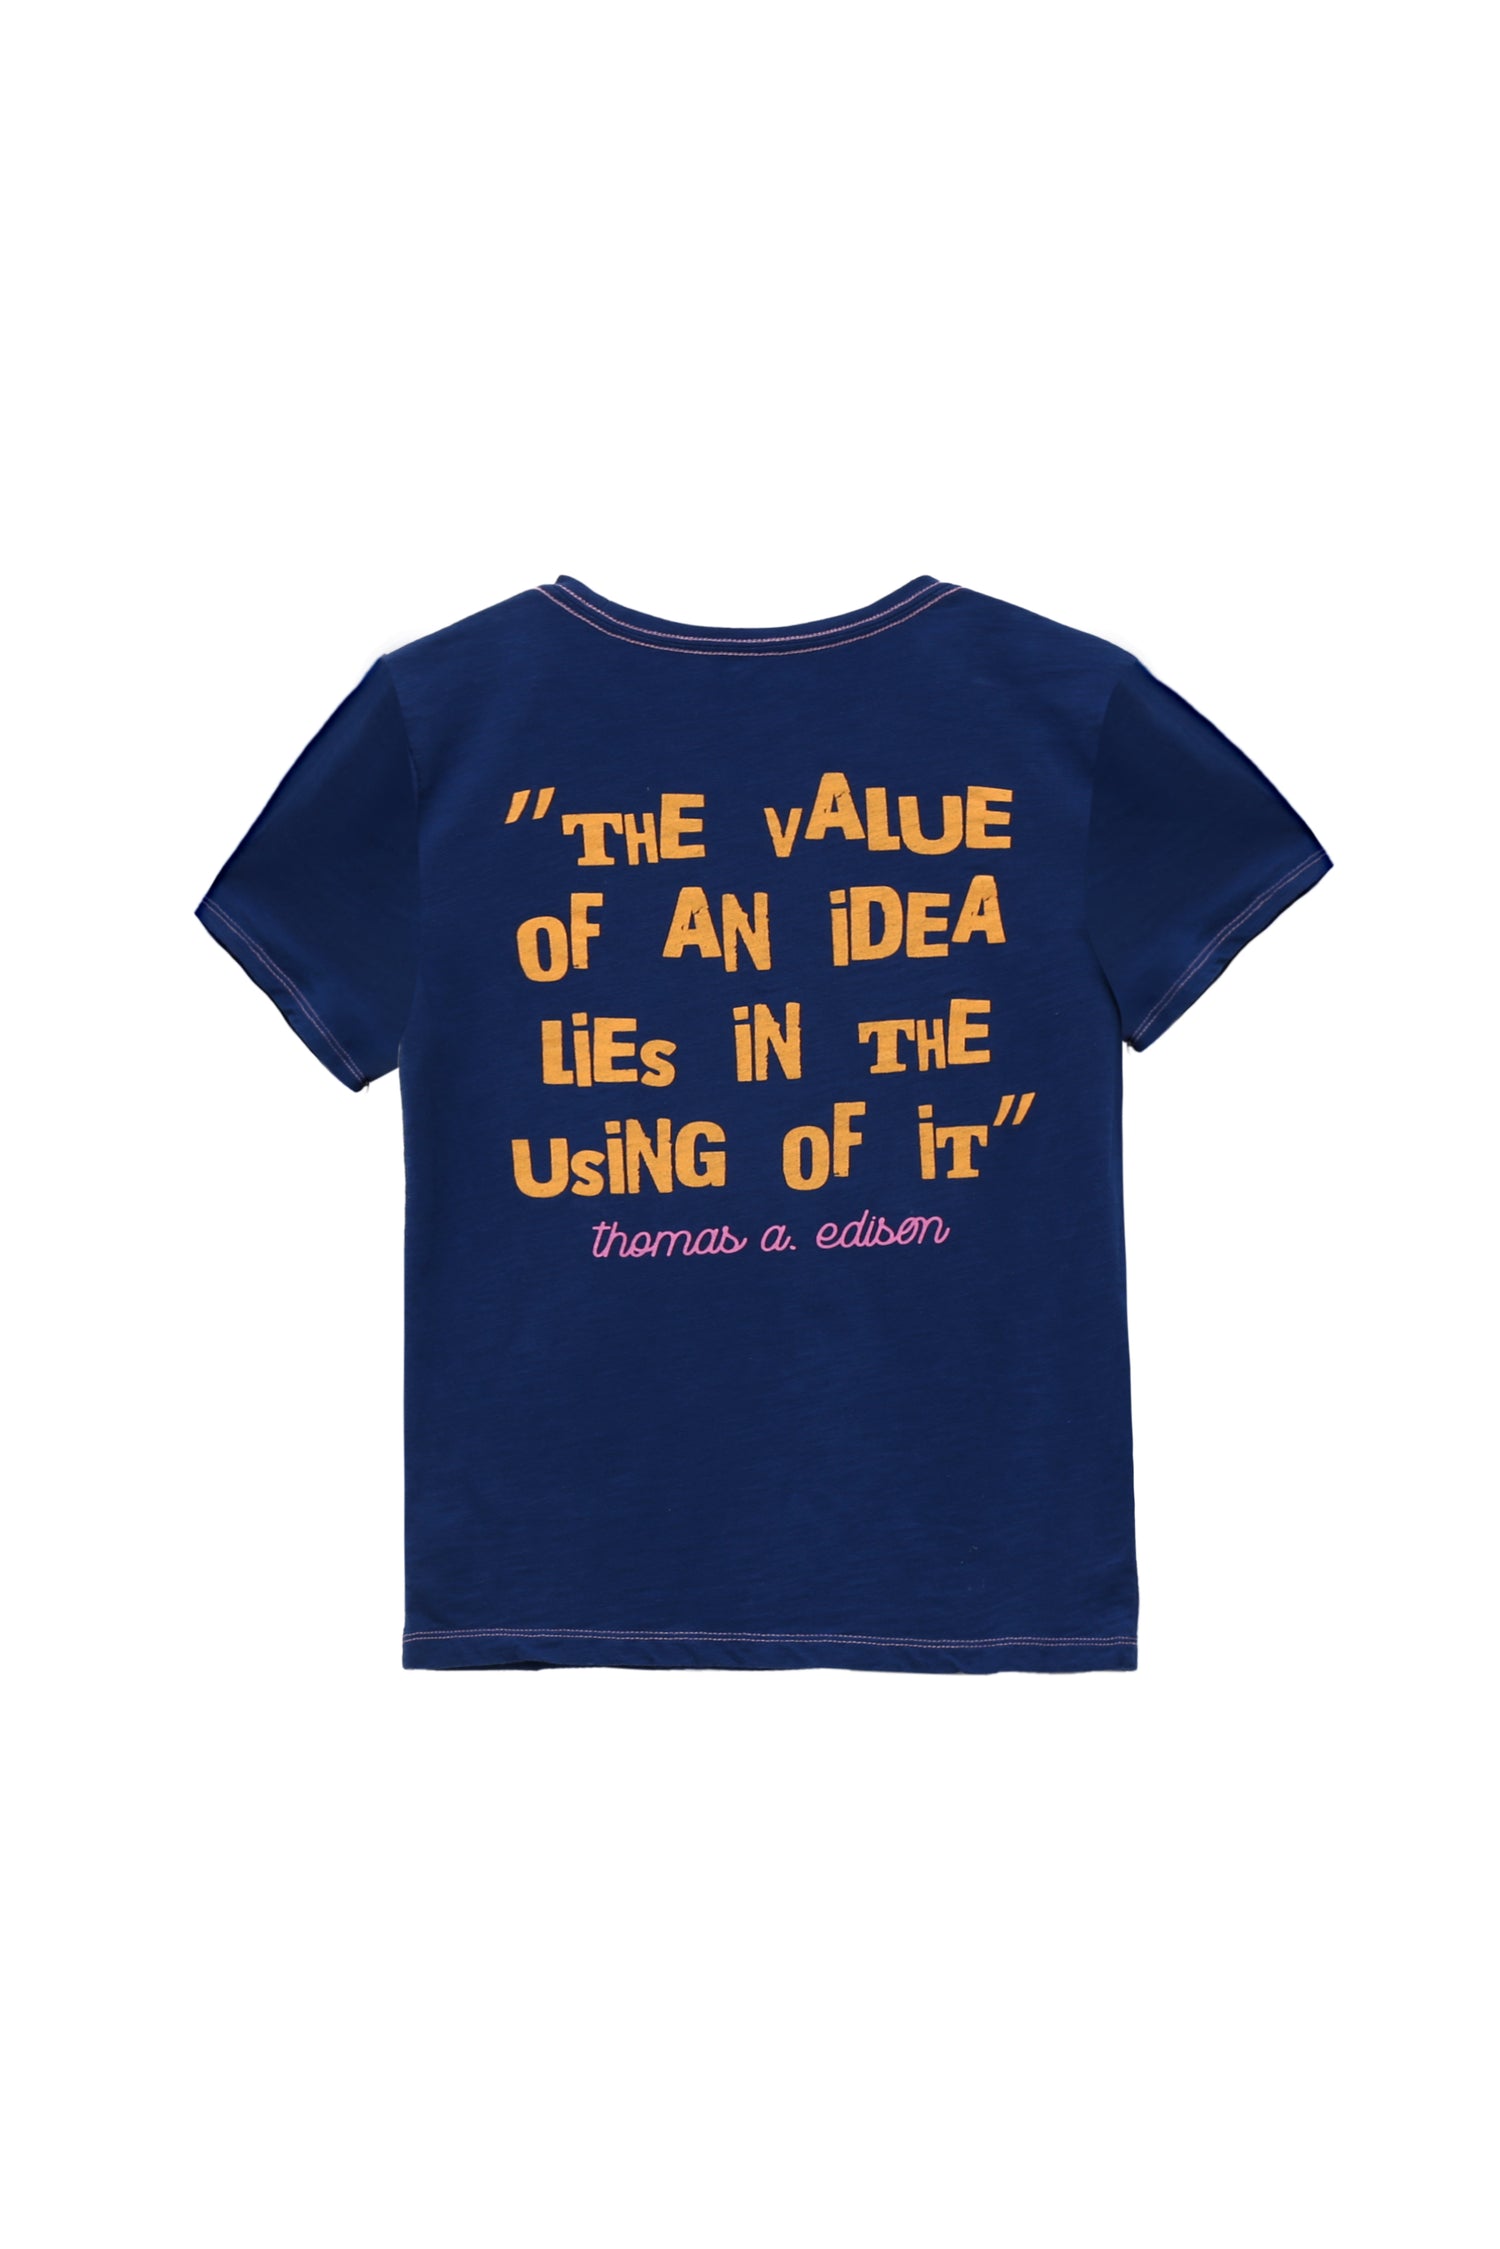 BACK OF DARK BLUE T-SHIRT WITH A QUOTE FROM THOMAS A. EDISON THAT READS "THE VALUE OF AN IDEA LIES IN THE USING OF IT"